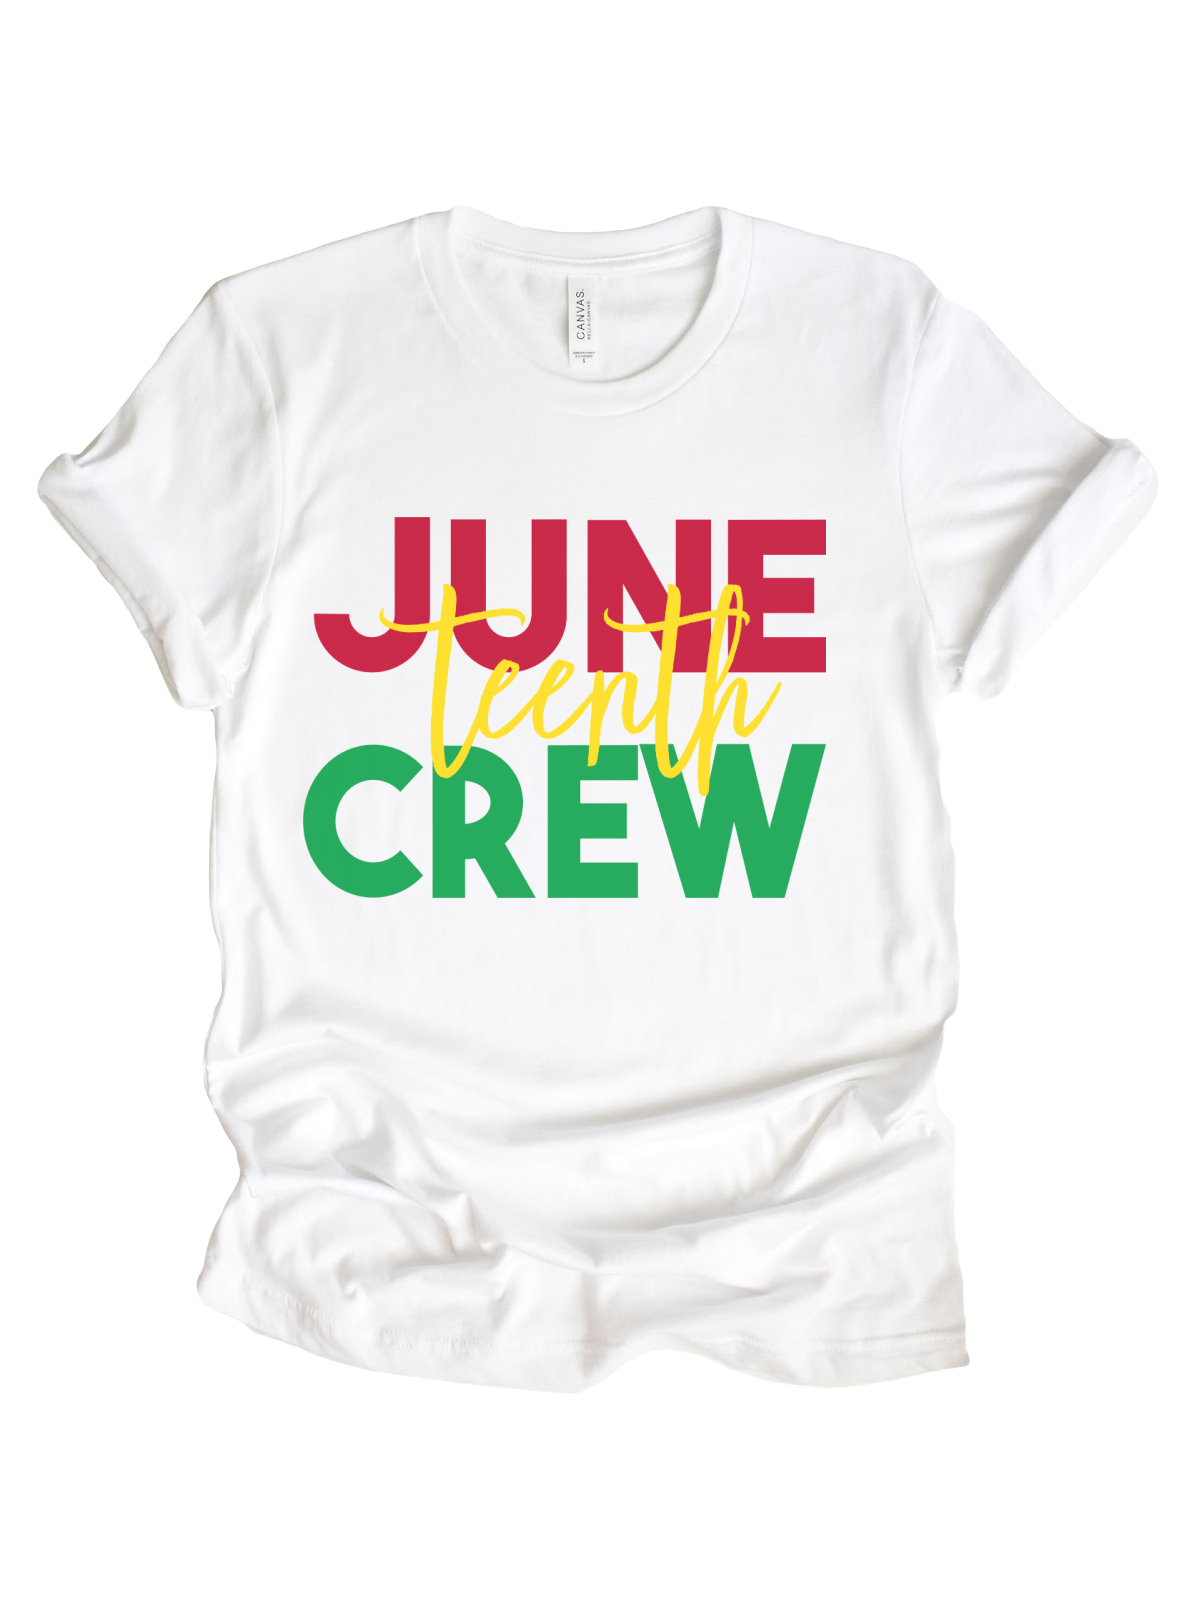 Juneteenth Crew Matching Family Shirts in White